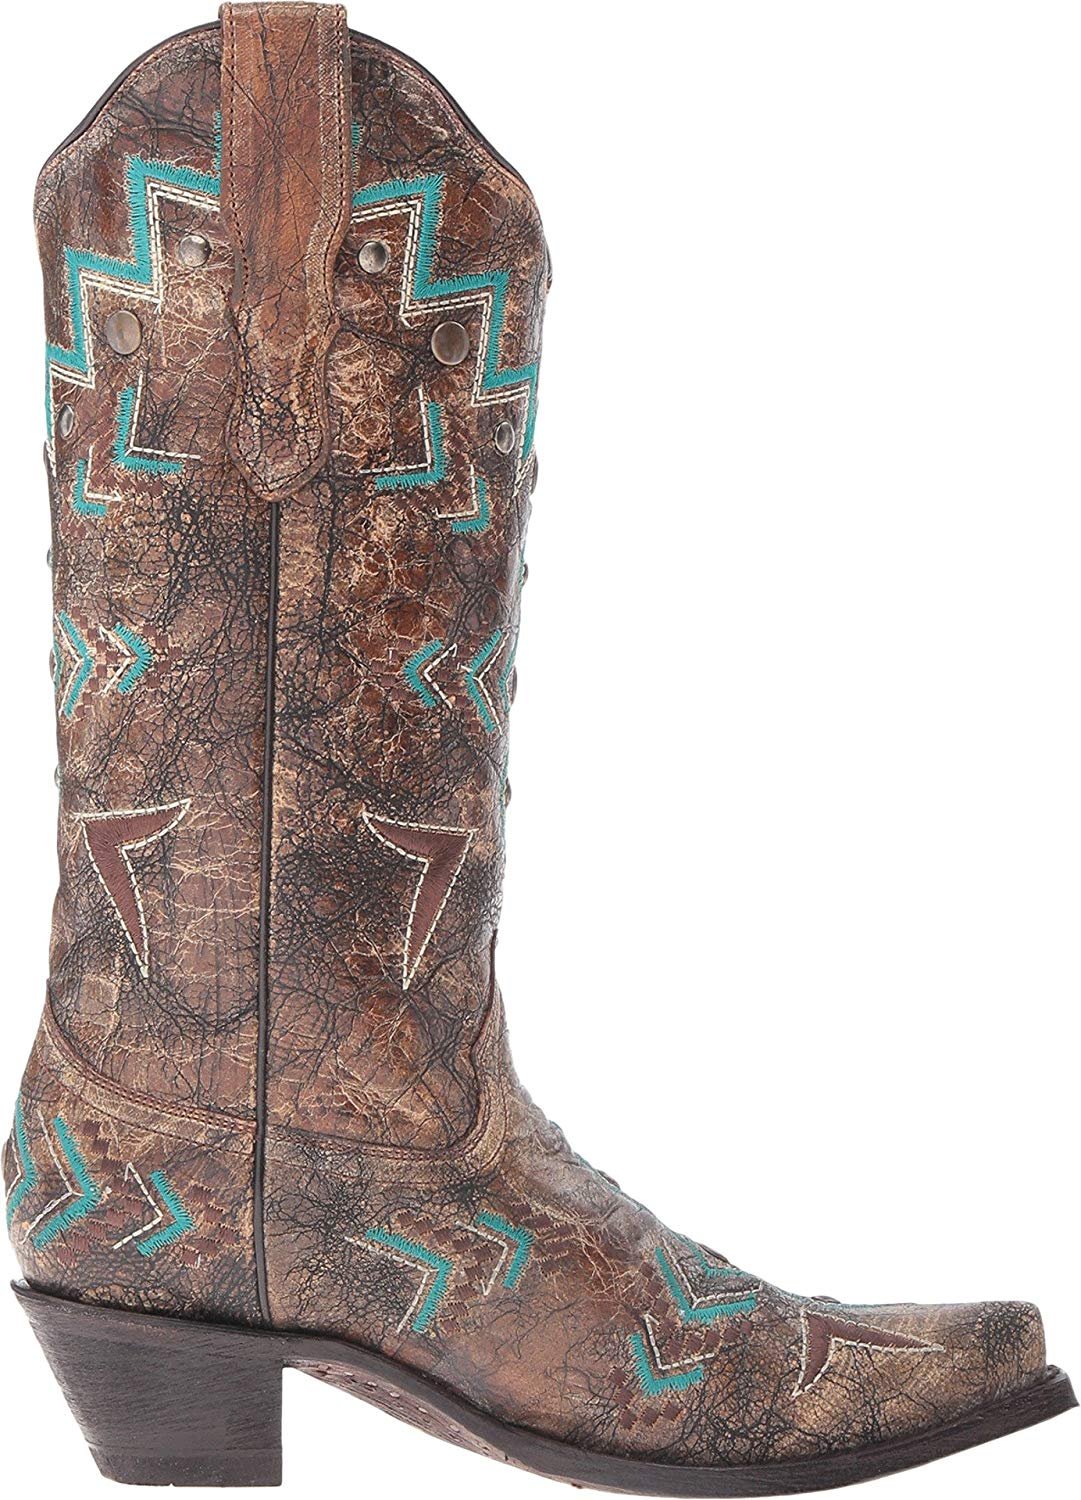 Corral Women's Bronze and Turquoise Southwest Cowgirl Boot - E1014 ...